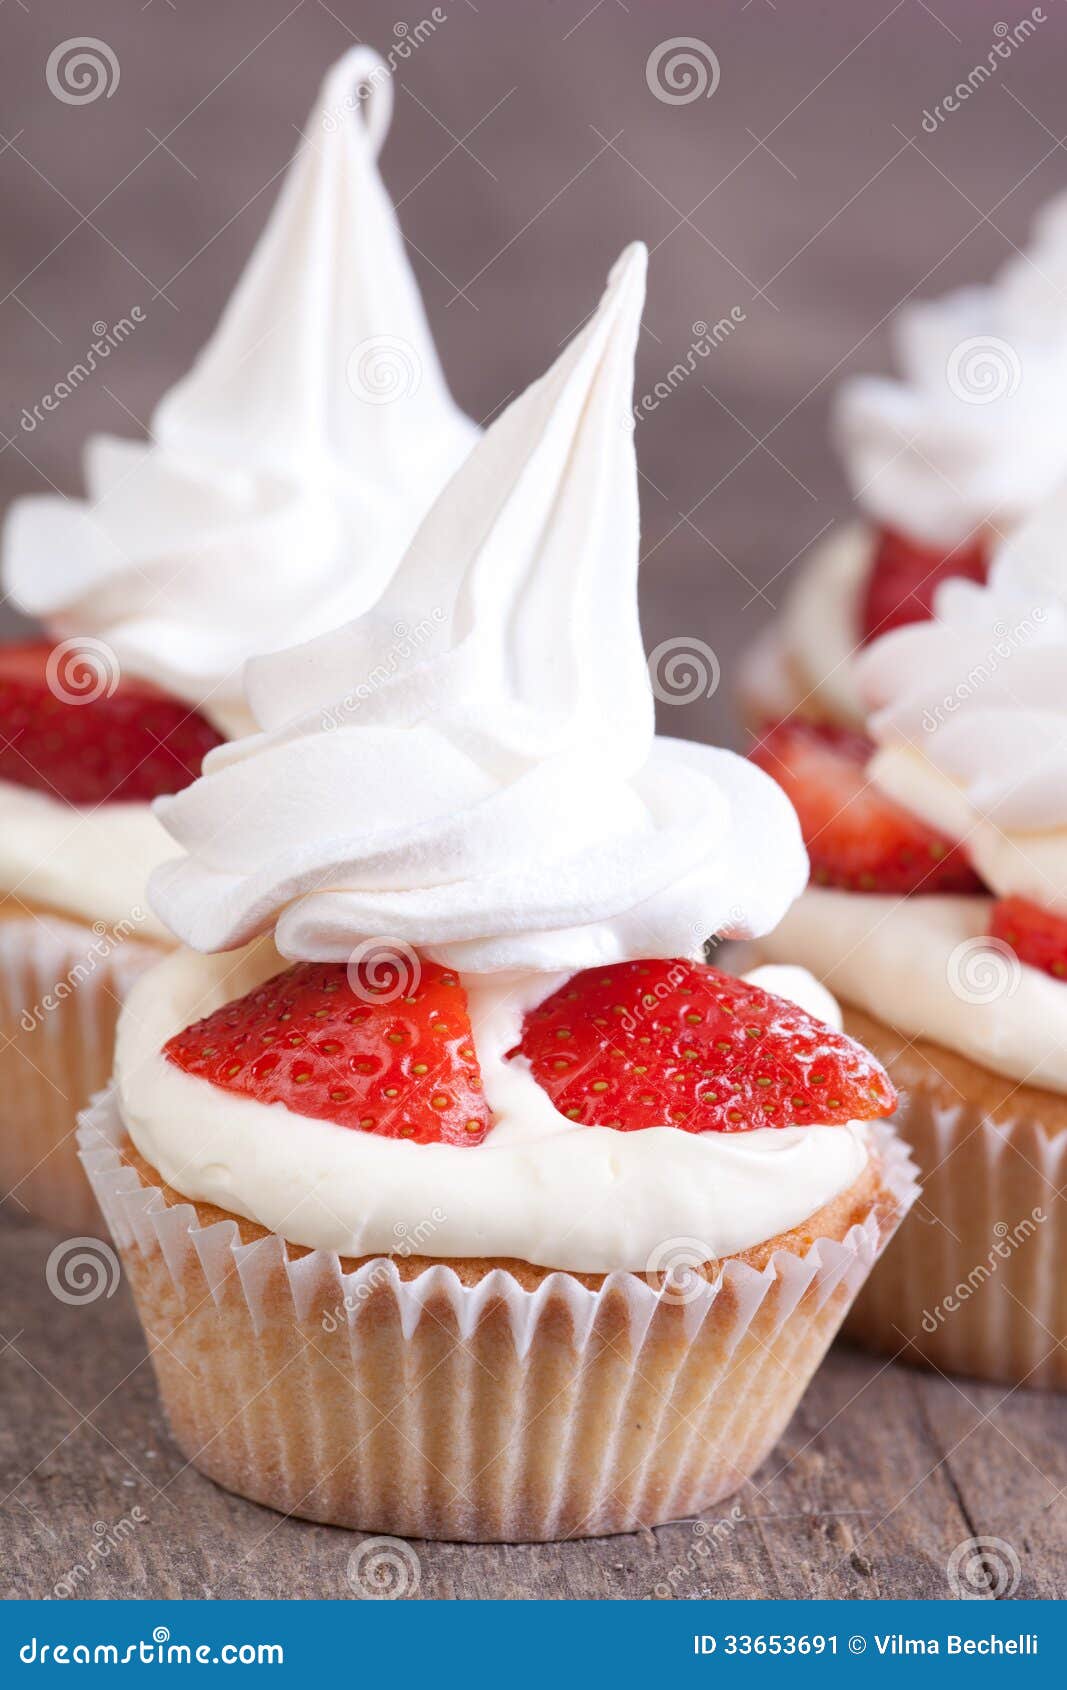 Vertical Picture of Pavlova Cupcakes Stock Image - Image of sweet, cake ...